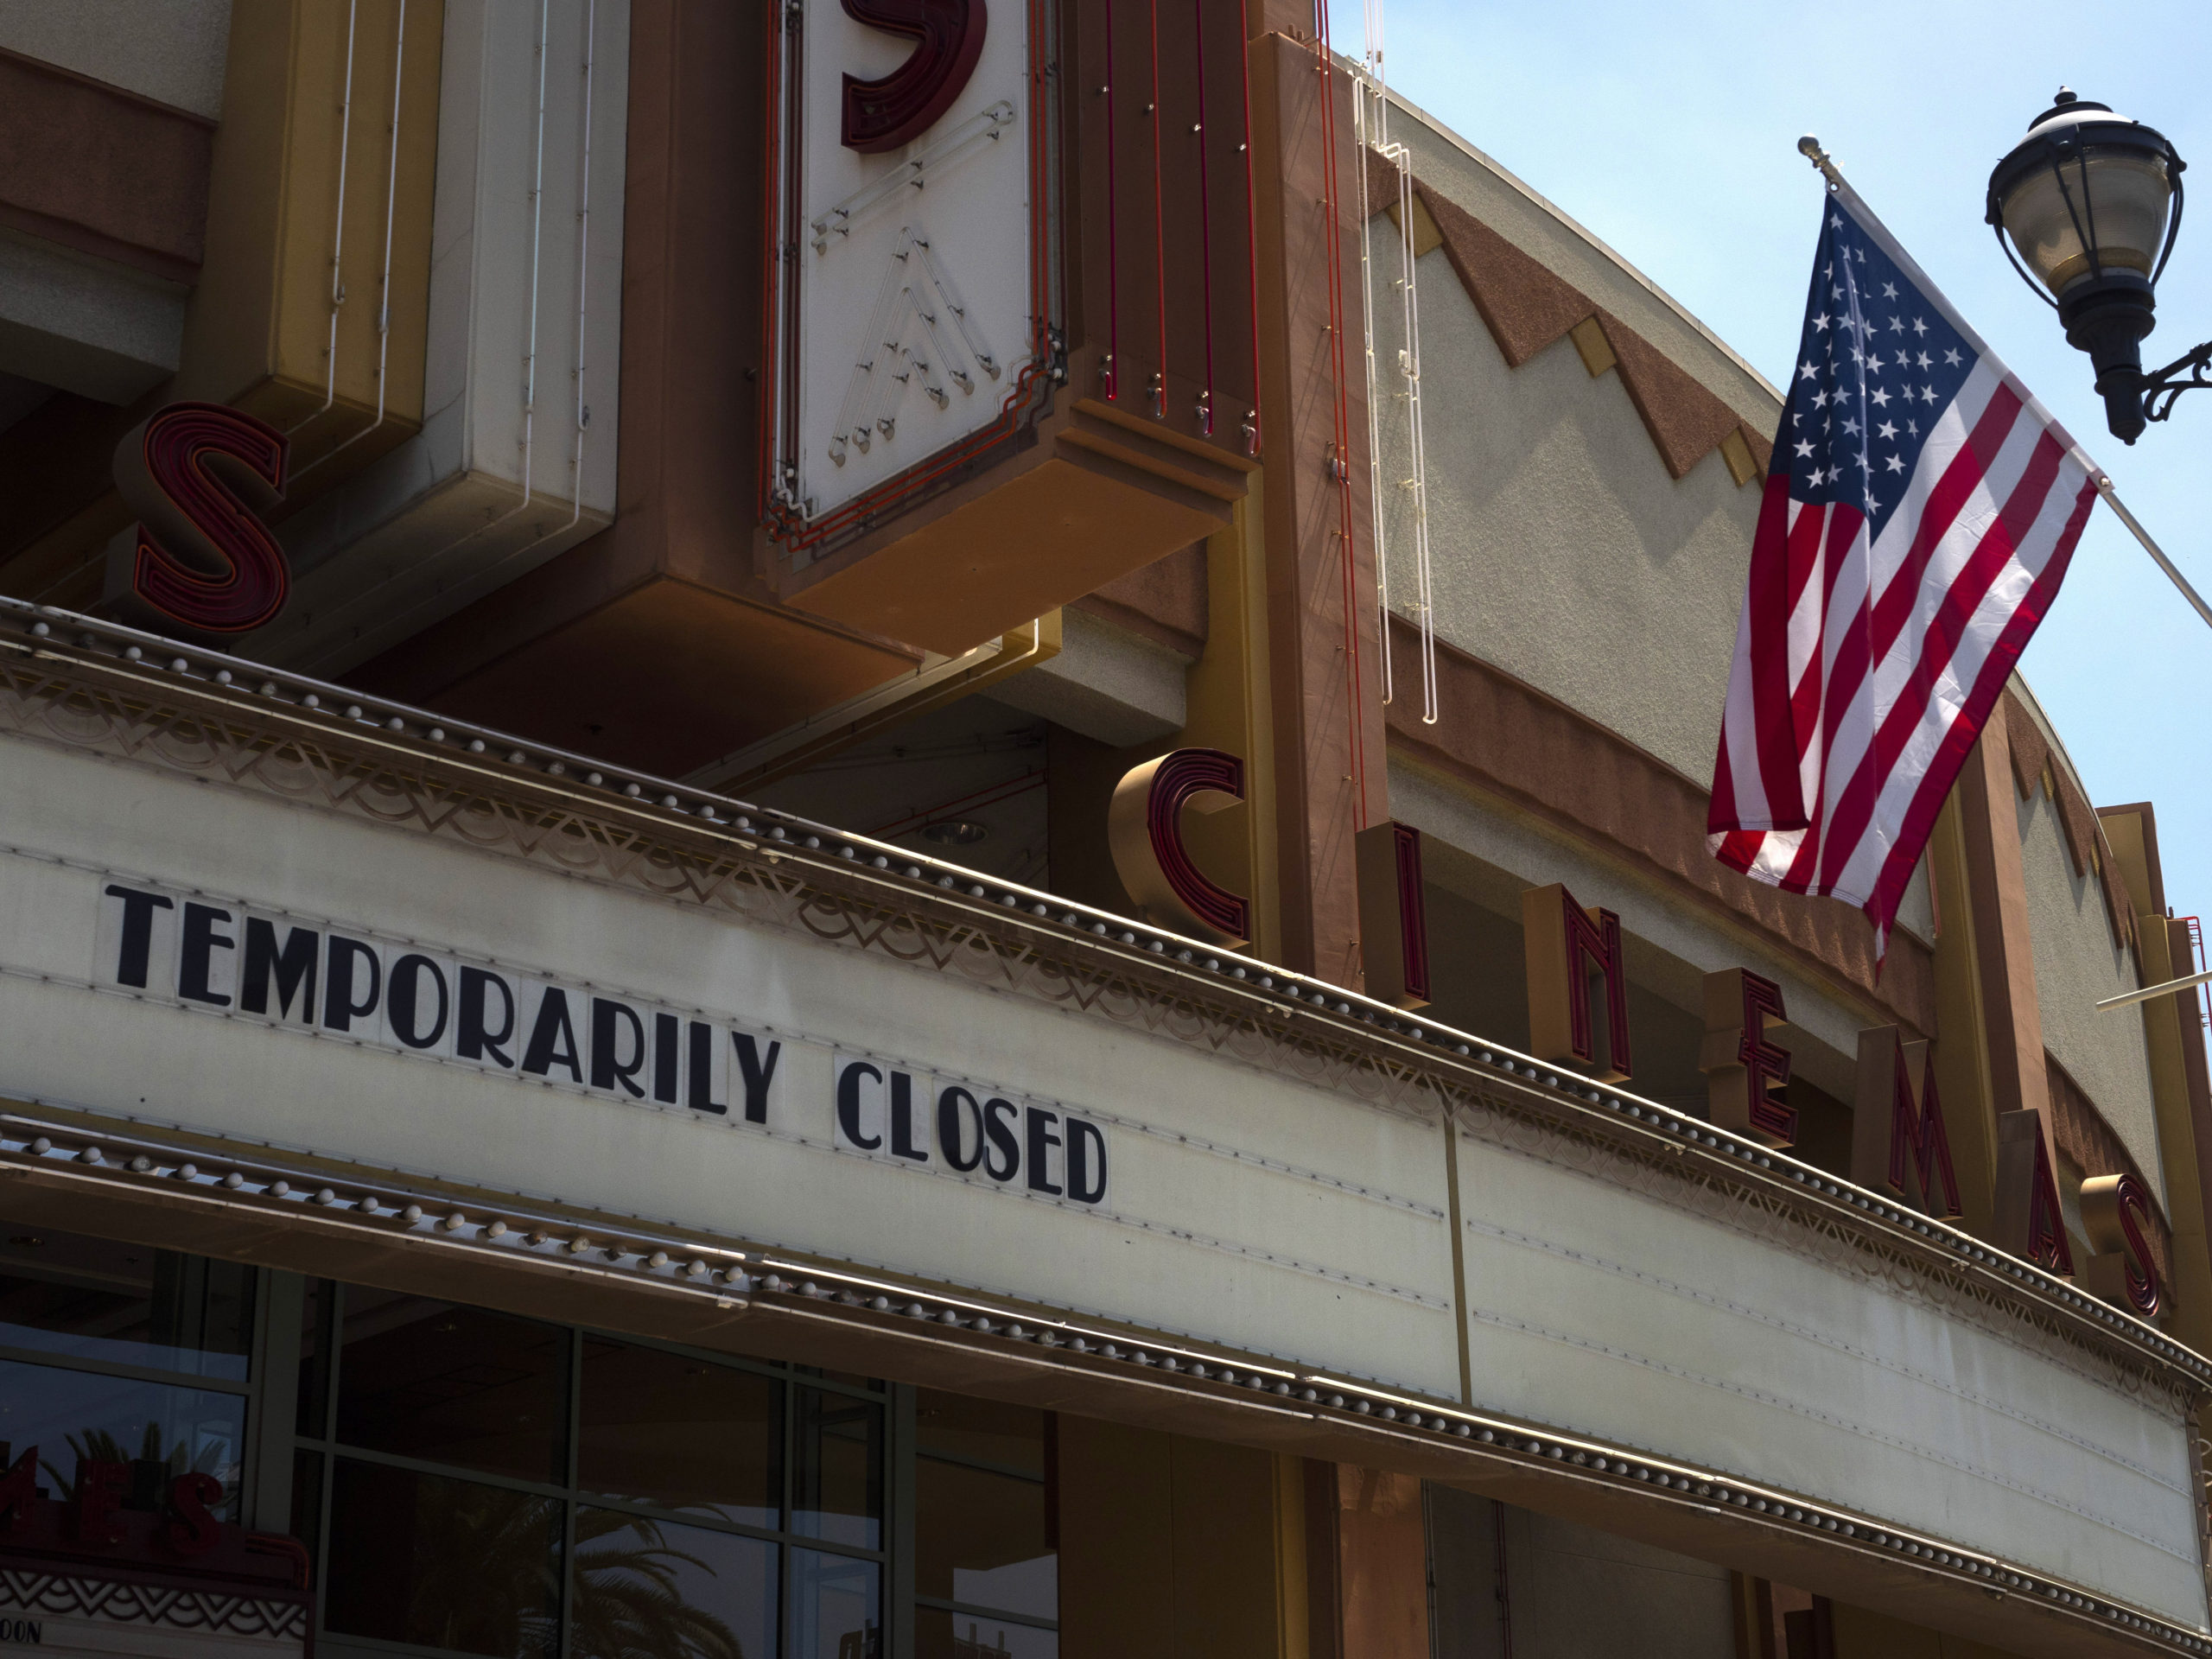 A movie theater is seen closed due to the coronavirus pandemic on July 2, 2020, in Brea, Calif. The U.S. economy shrank at a record 32.9% rate in the second quarter as the pandemic cost tens of millions of jobs. CREDIT: Jae C. Hong/AP